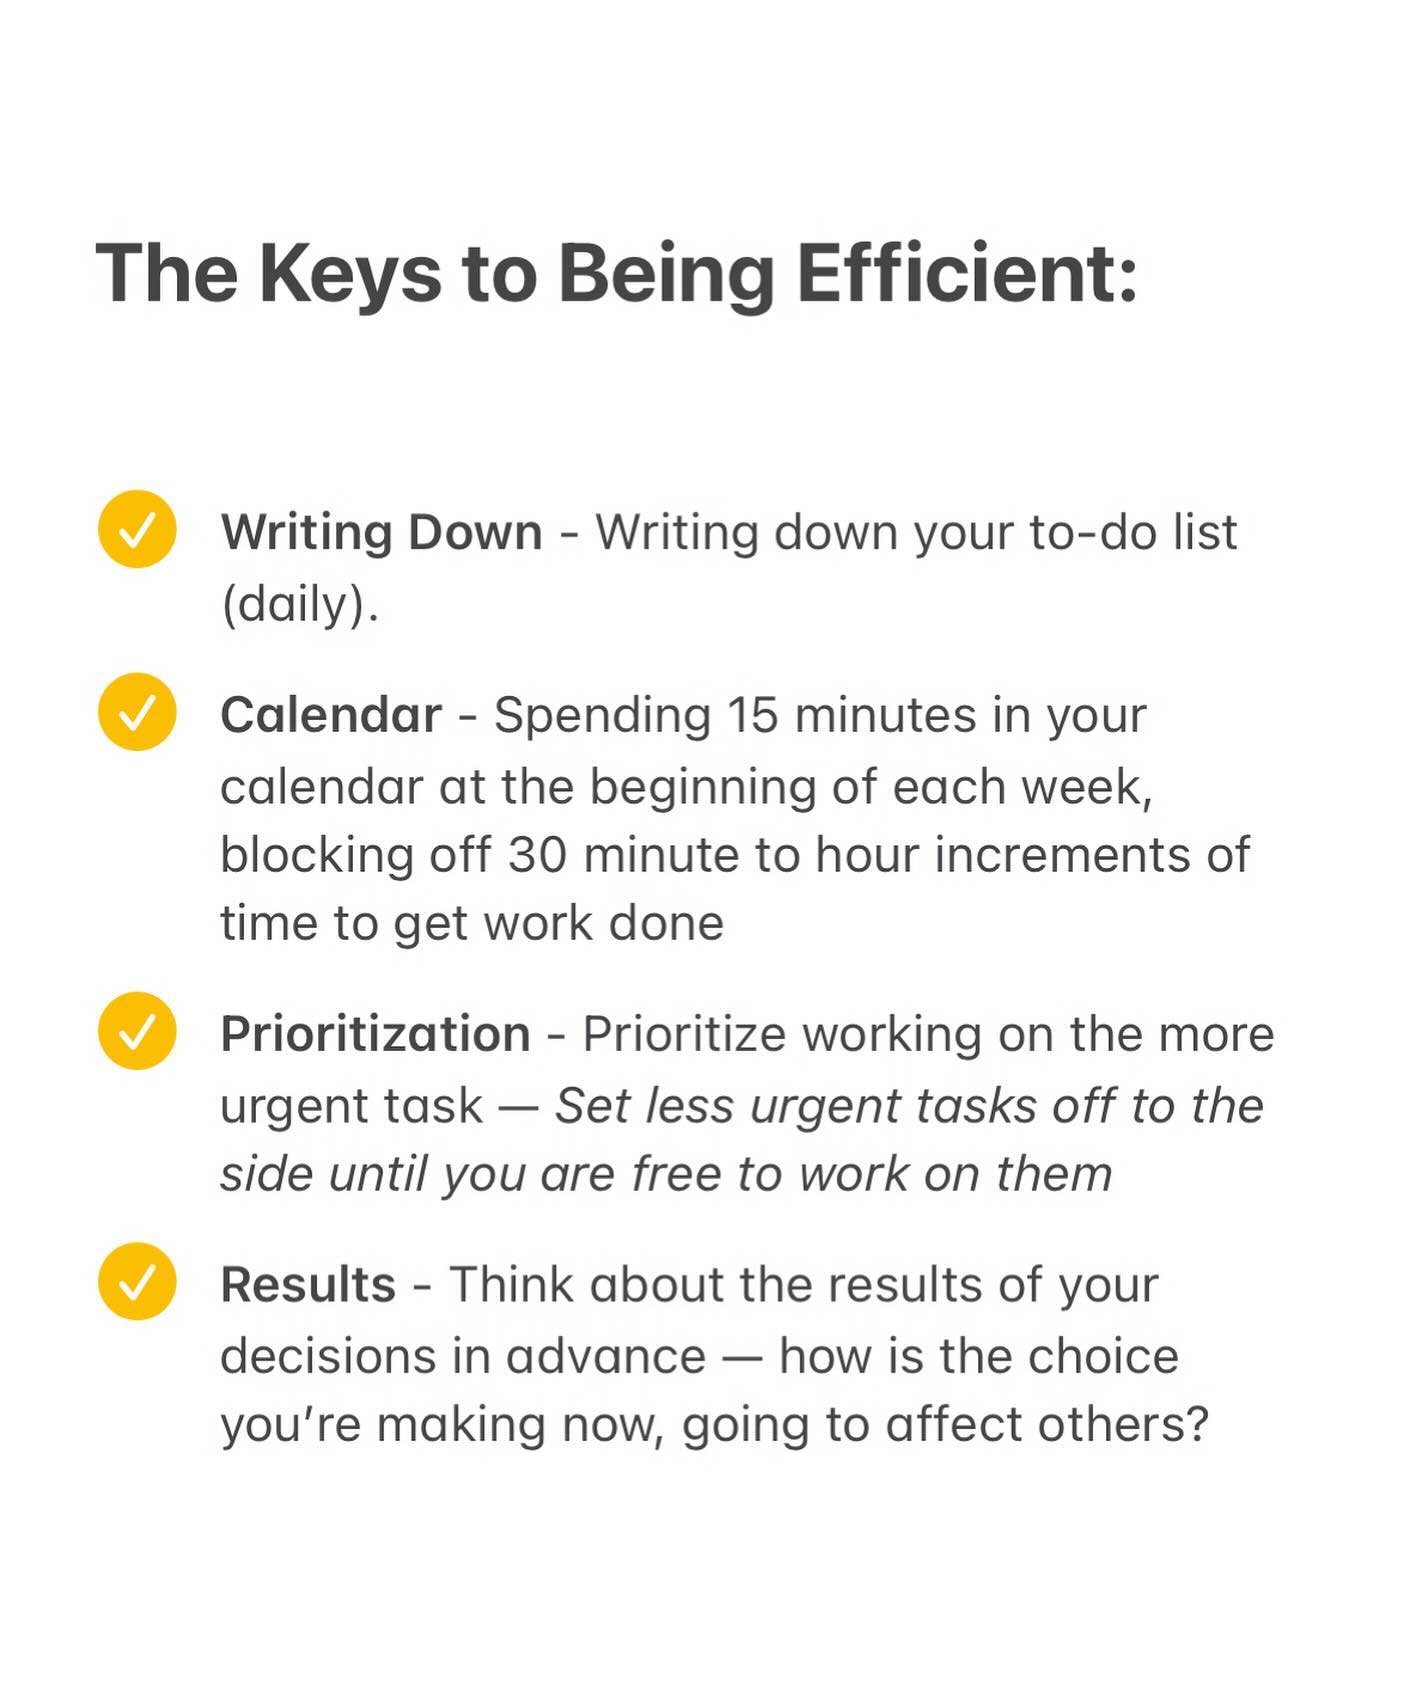 Do you ever notice how other people can get so much done? 🤓

The answer is really simple: those people have mastered how to be efficient.

✖️ Here are our keys to being efficient:

1. Writing Down
2. Calendar
3. Prioritization
4. Results

These four